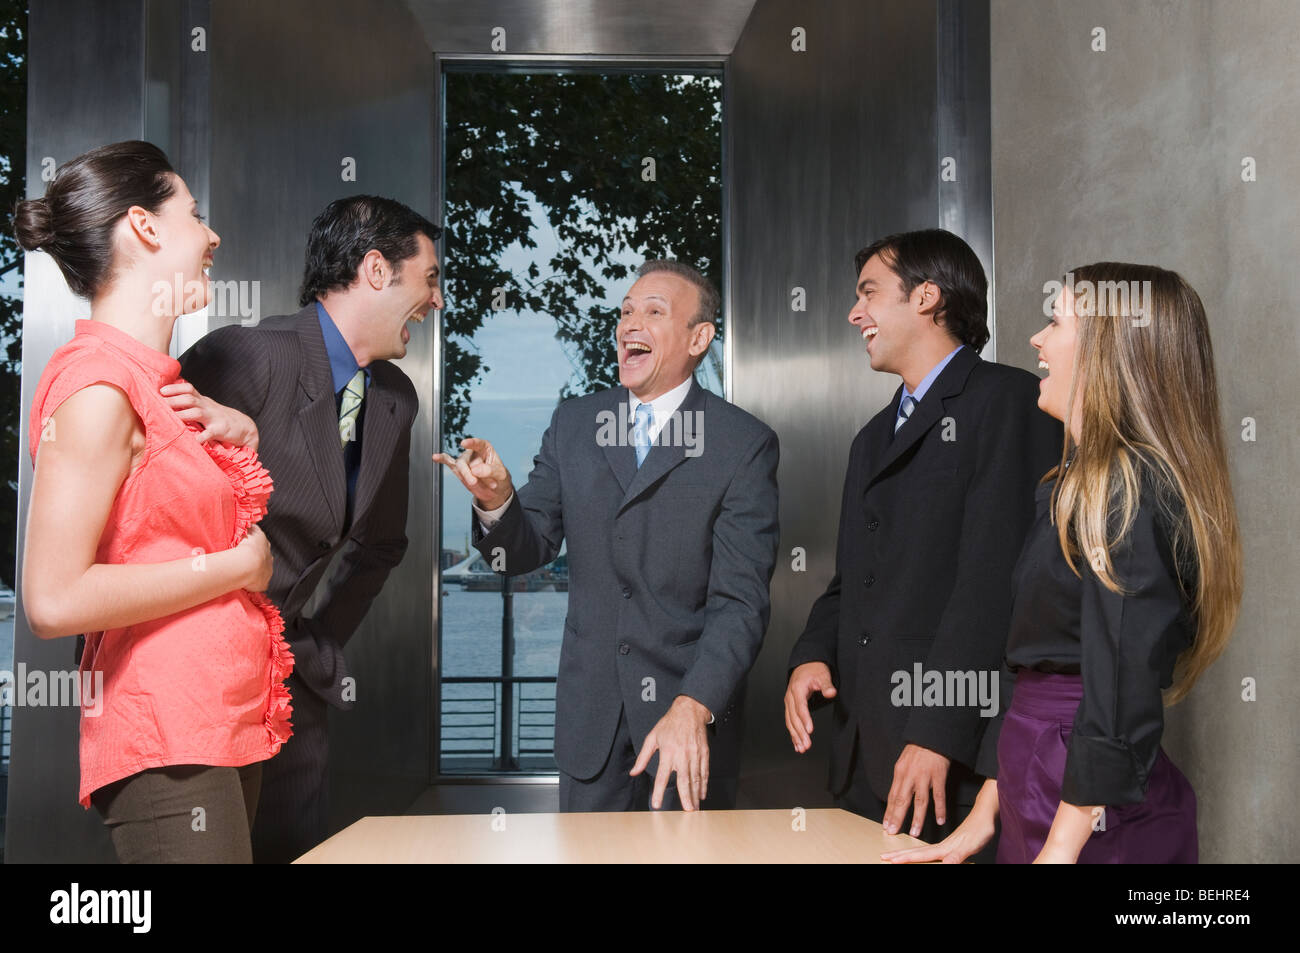 Business executives laughing in a conference room Stock Photo